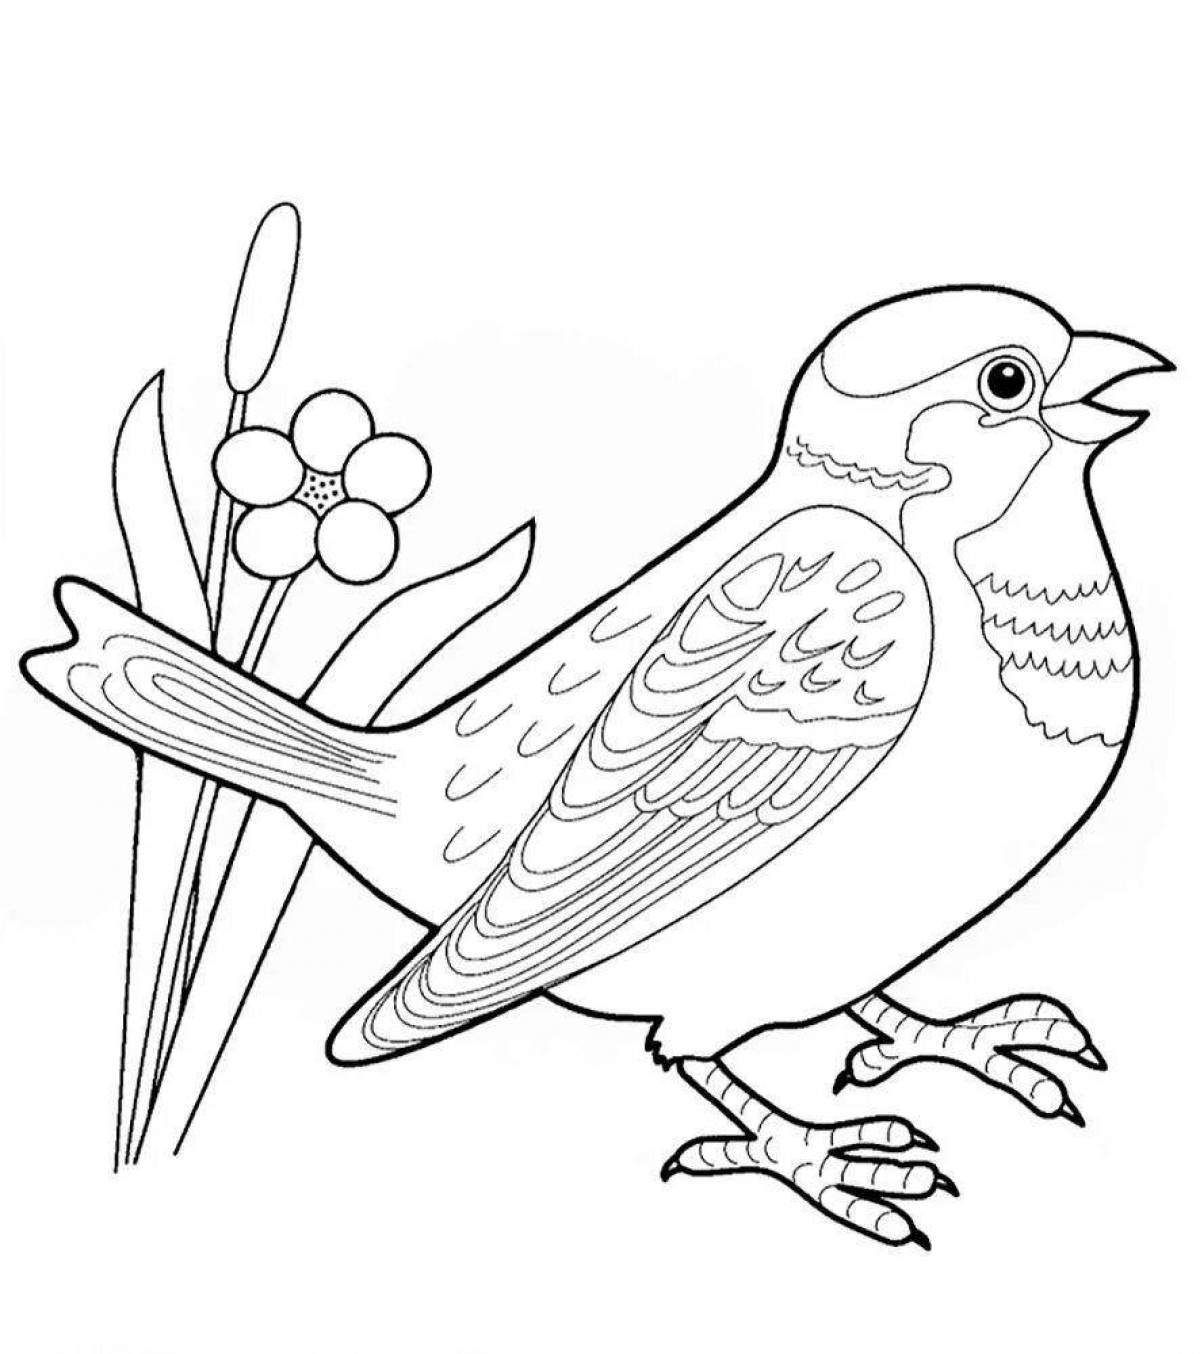 Coloring book dazzling sparrow for kids